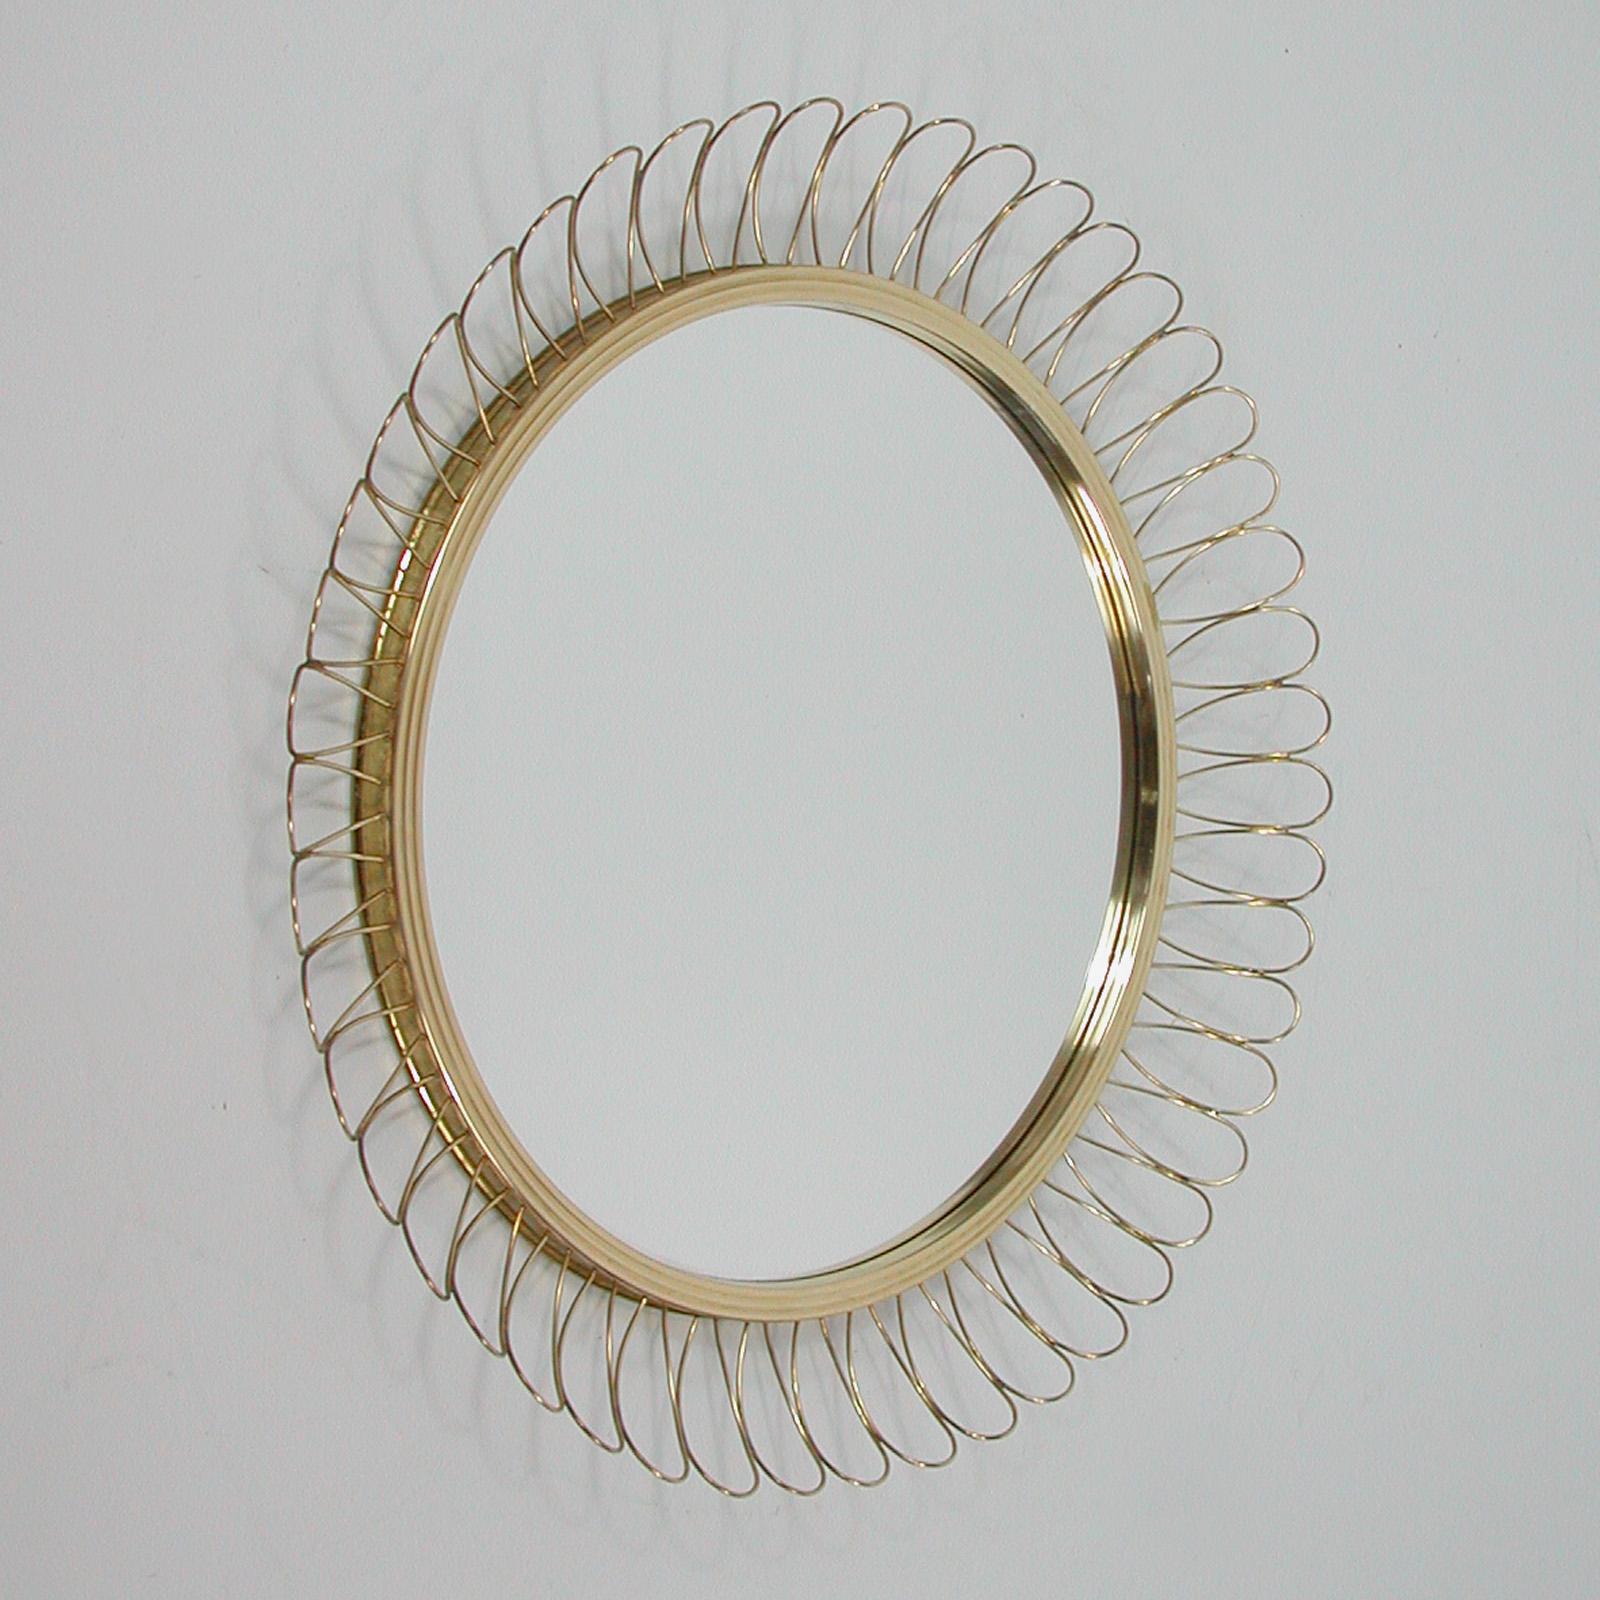 This beautiful brass loop wall mirror was designed and manufactured in Sweden in the 1950s. The brass frame with nice warm vintage patina. The mirror flawless. 

Measures: Diameter app.: 15.8